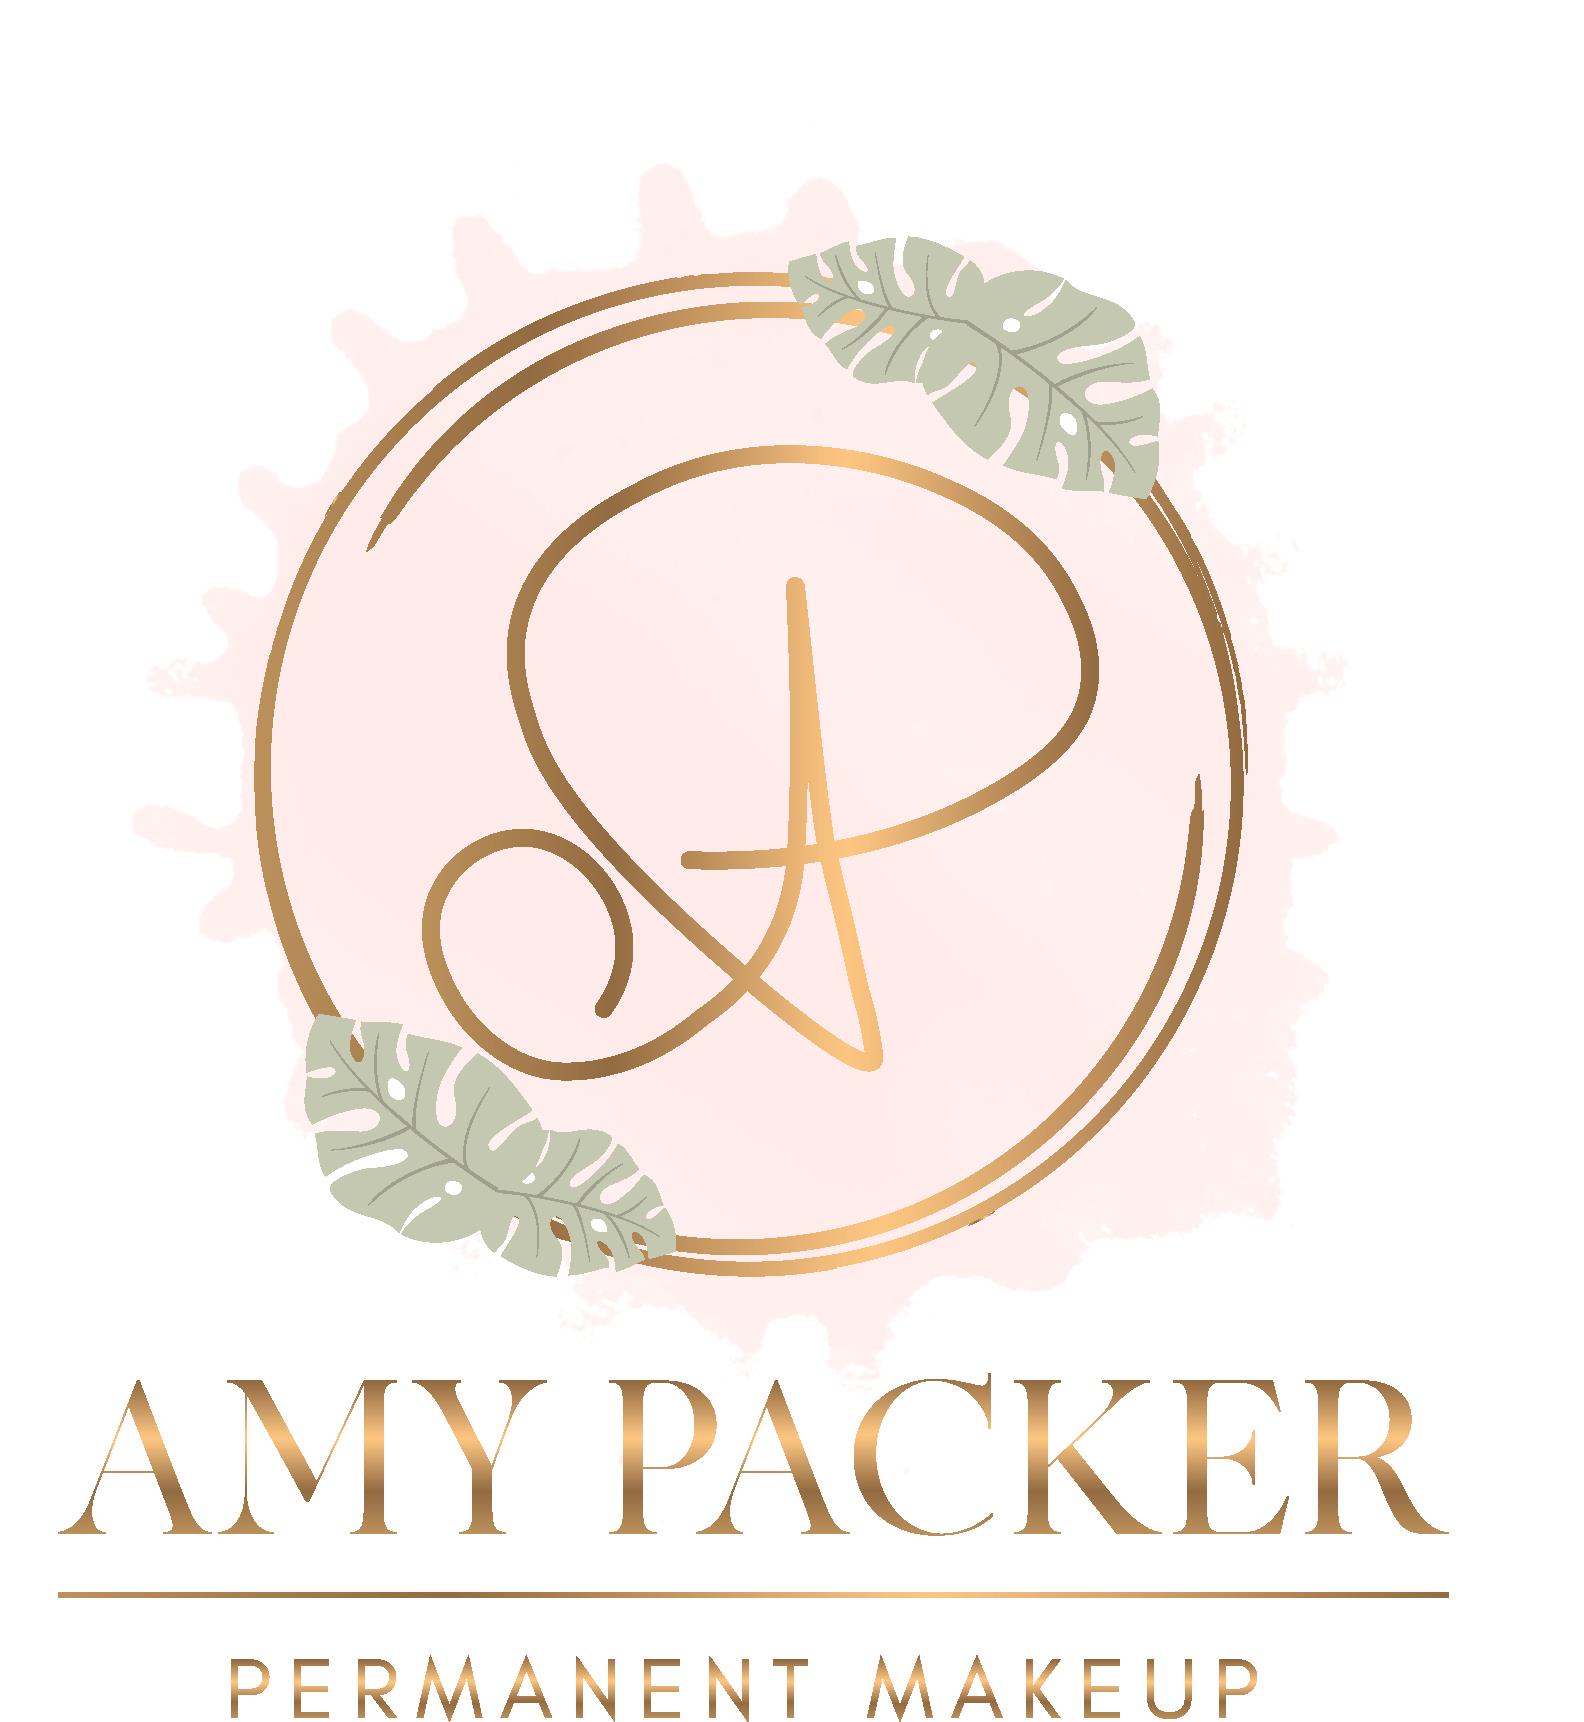 Amy Packer Permanent Make Up